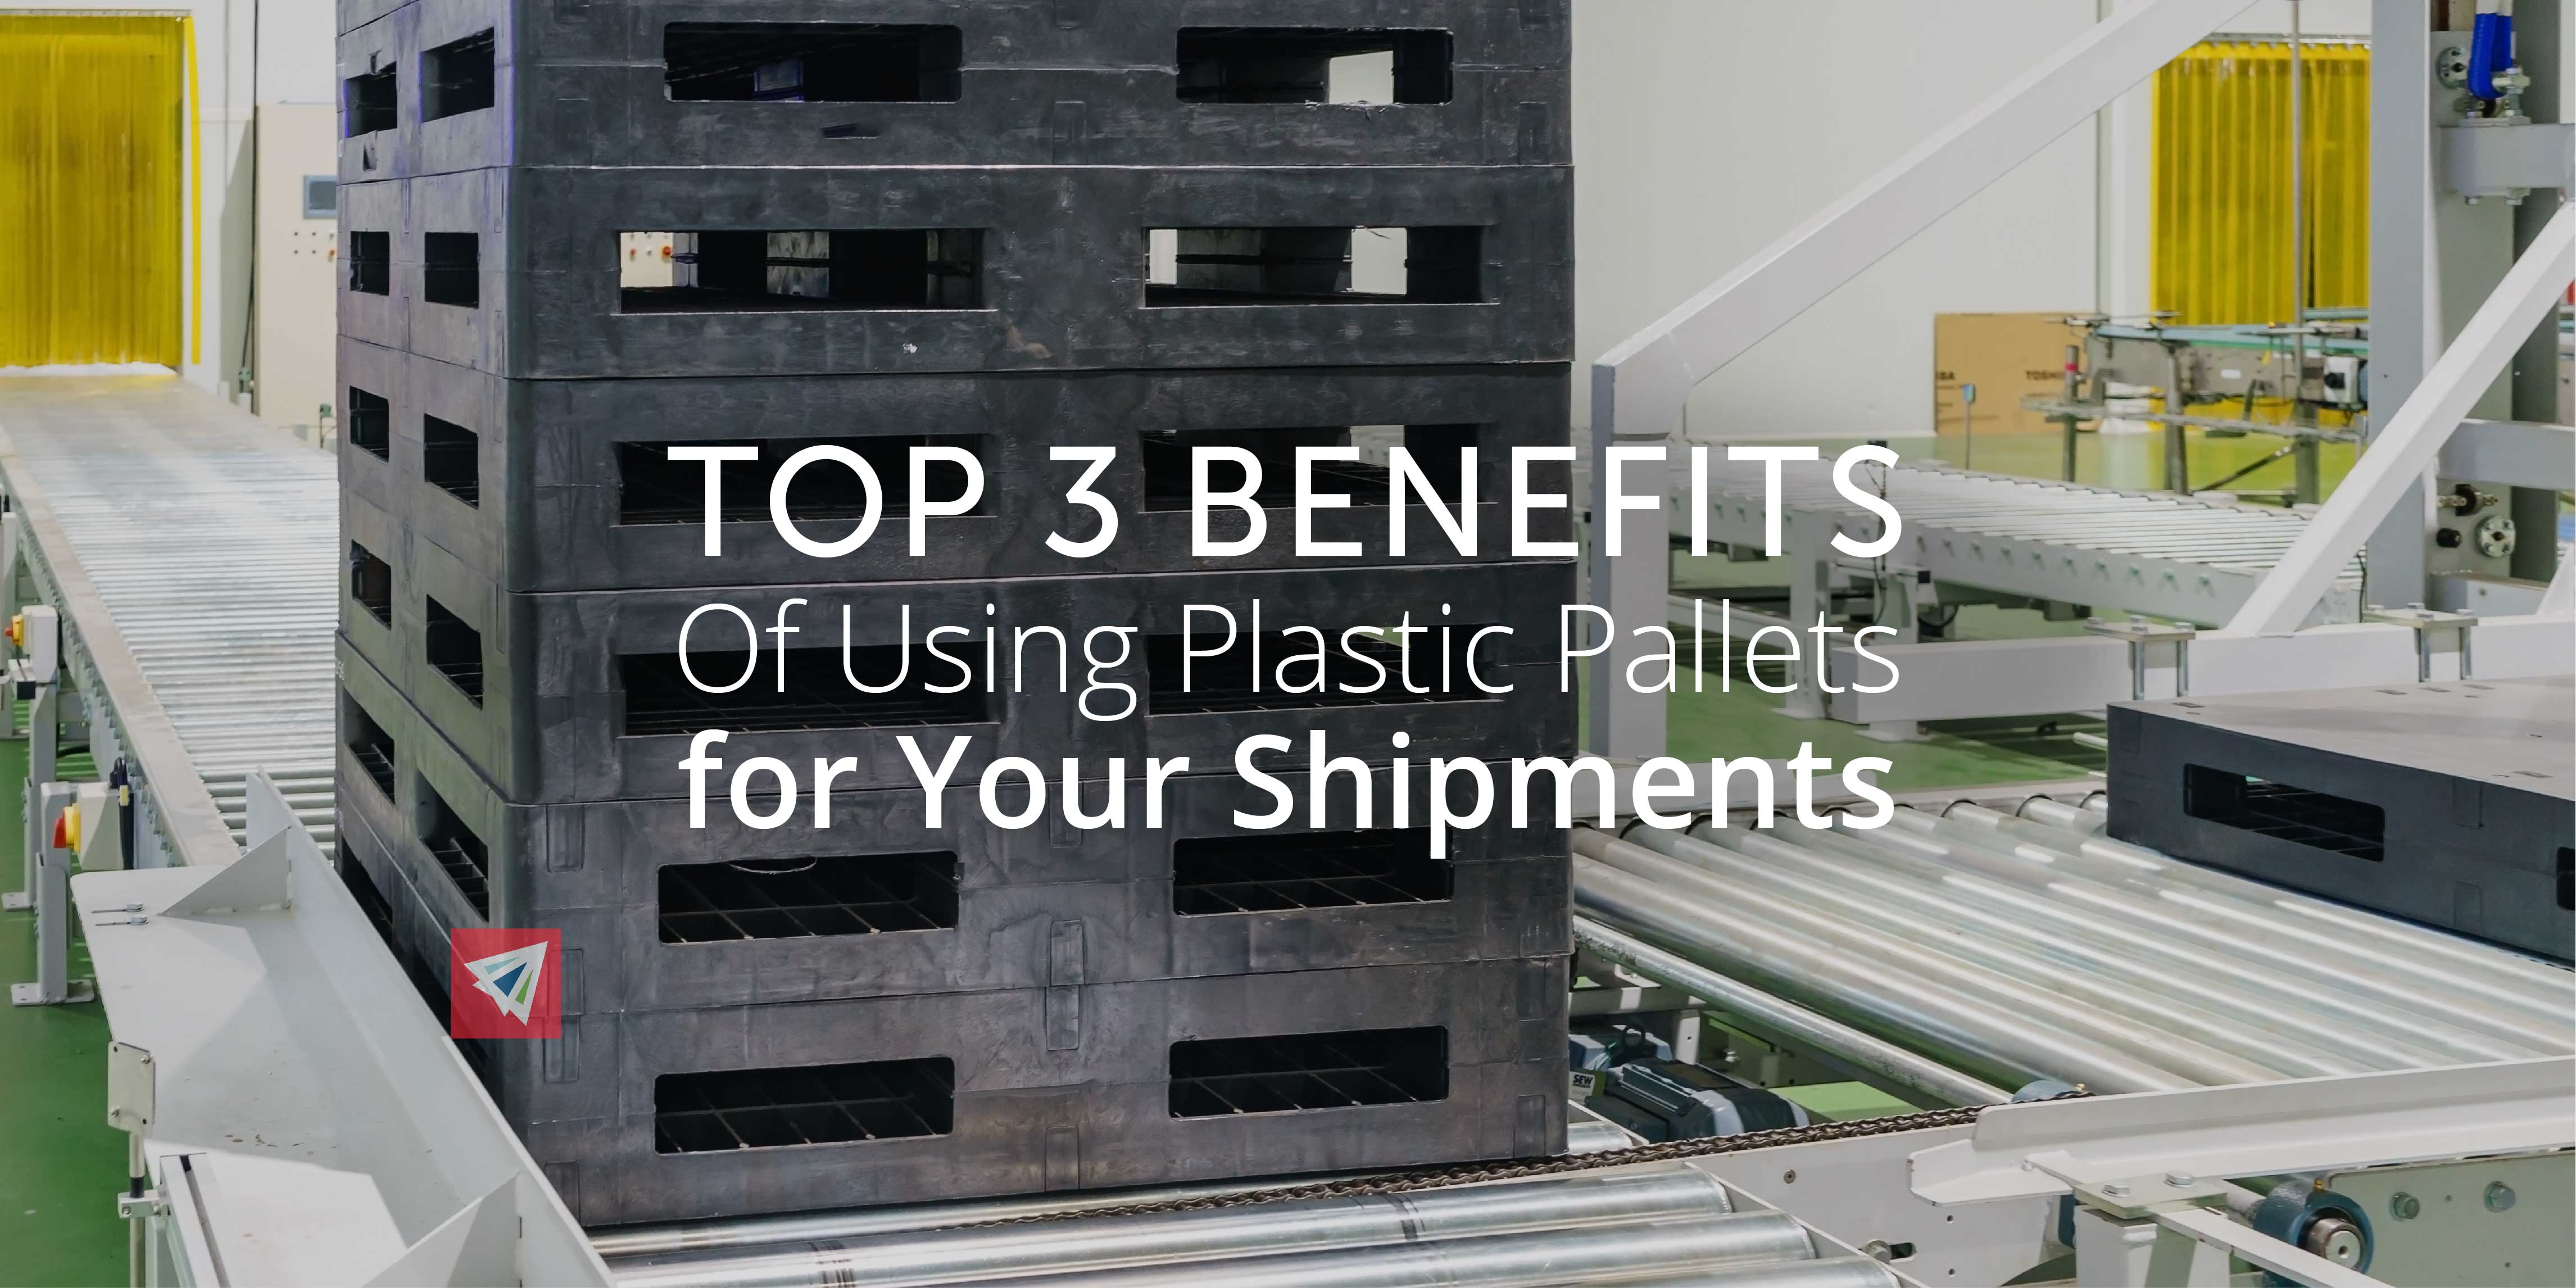 Top 3 Benefits of Using Plastic Pallets for Your Shipments